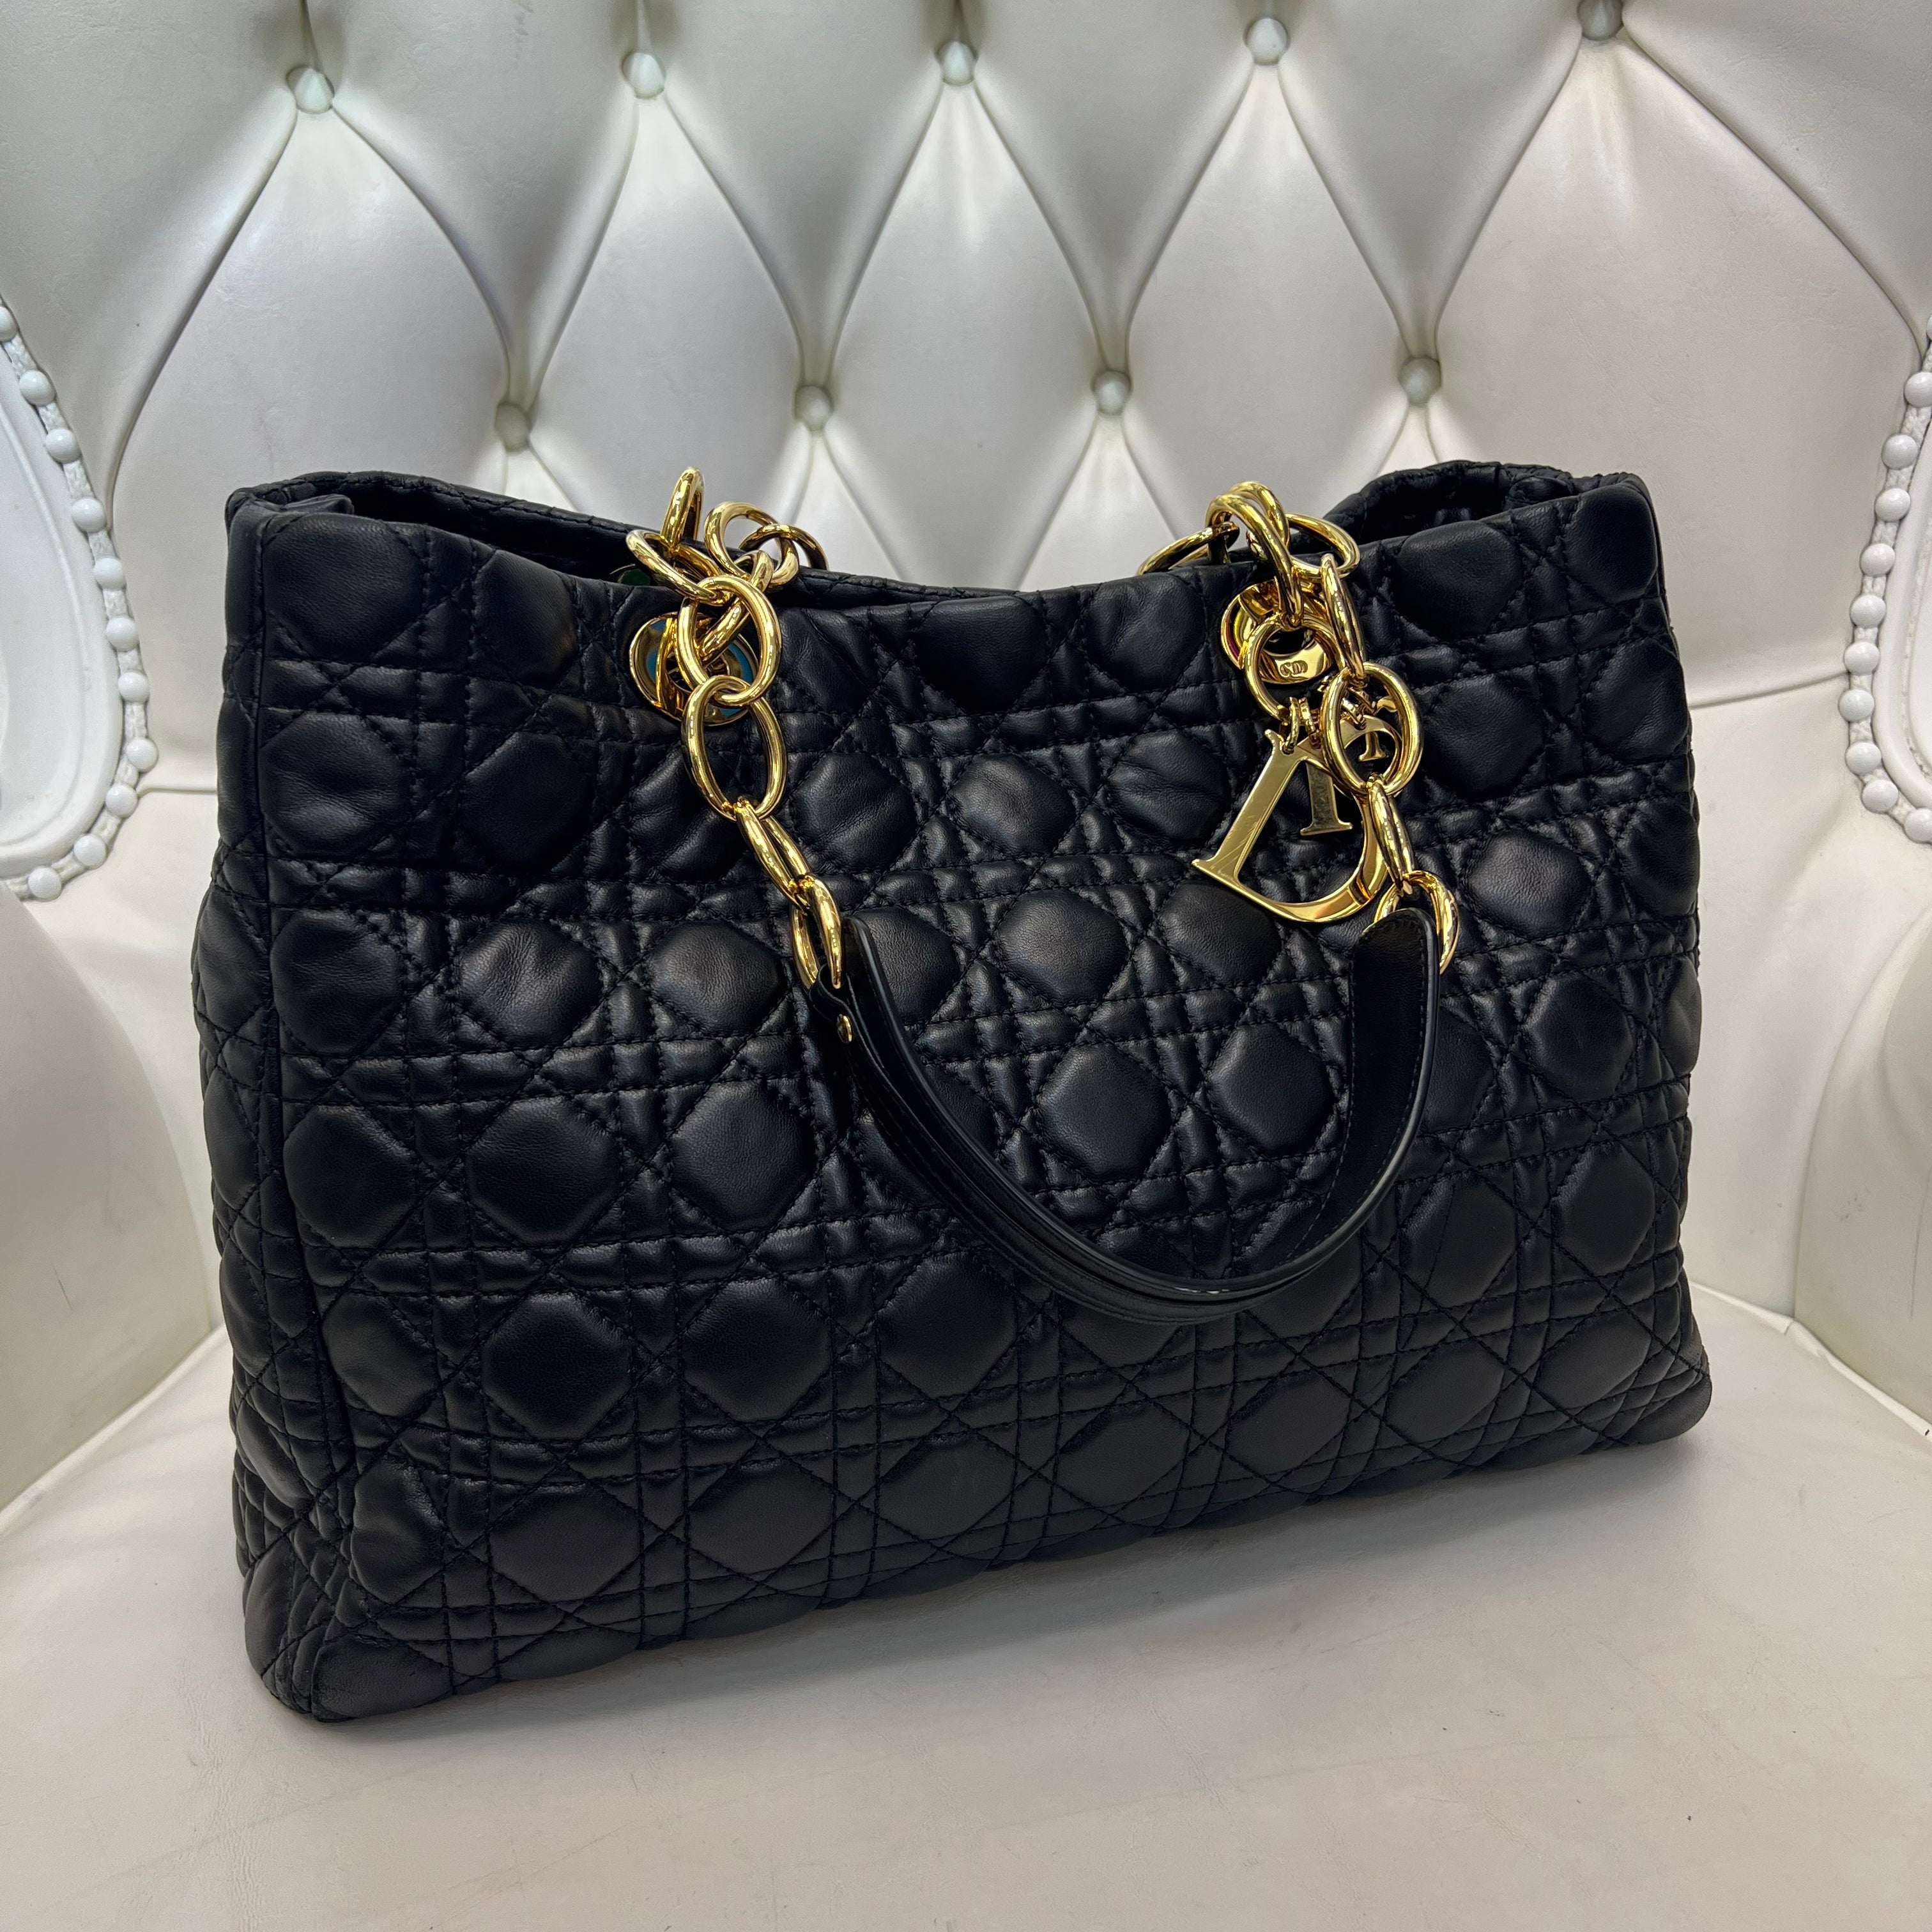 Christian Dior Black Cannage Quilted Lambskin Leather Soft Medium Zipped Shopping Tote Bag